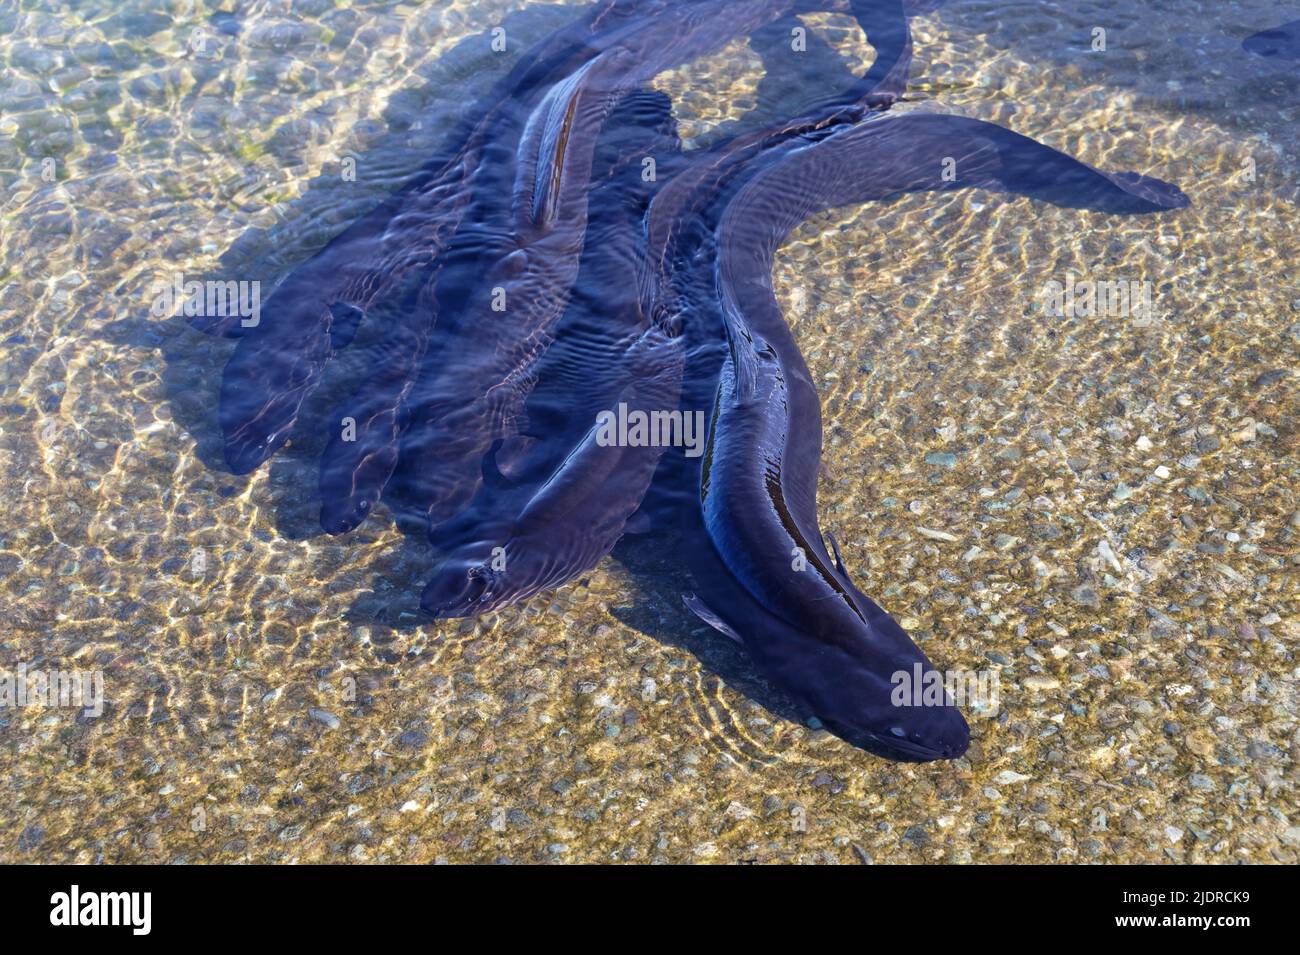 Lake Rotoiti is the home to longfin eels in New Zealand. These amazing native eels spend up to 100 years in the lake (for females) before migrating to Stock Photo